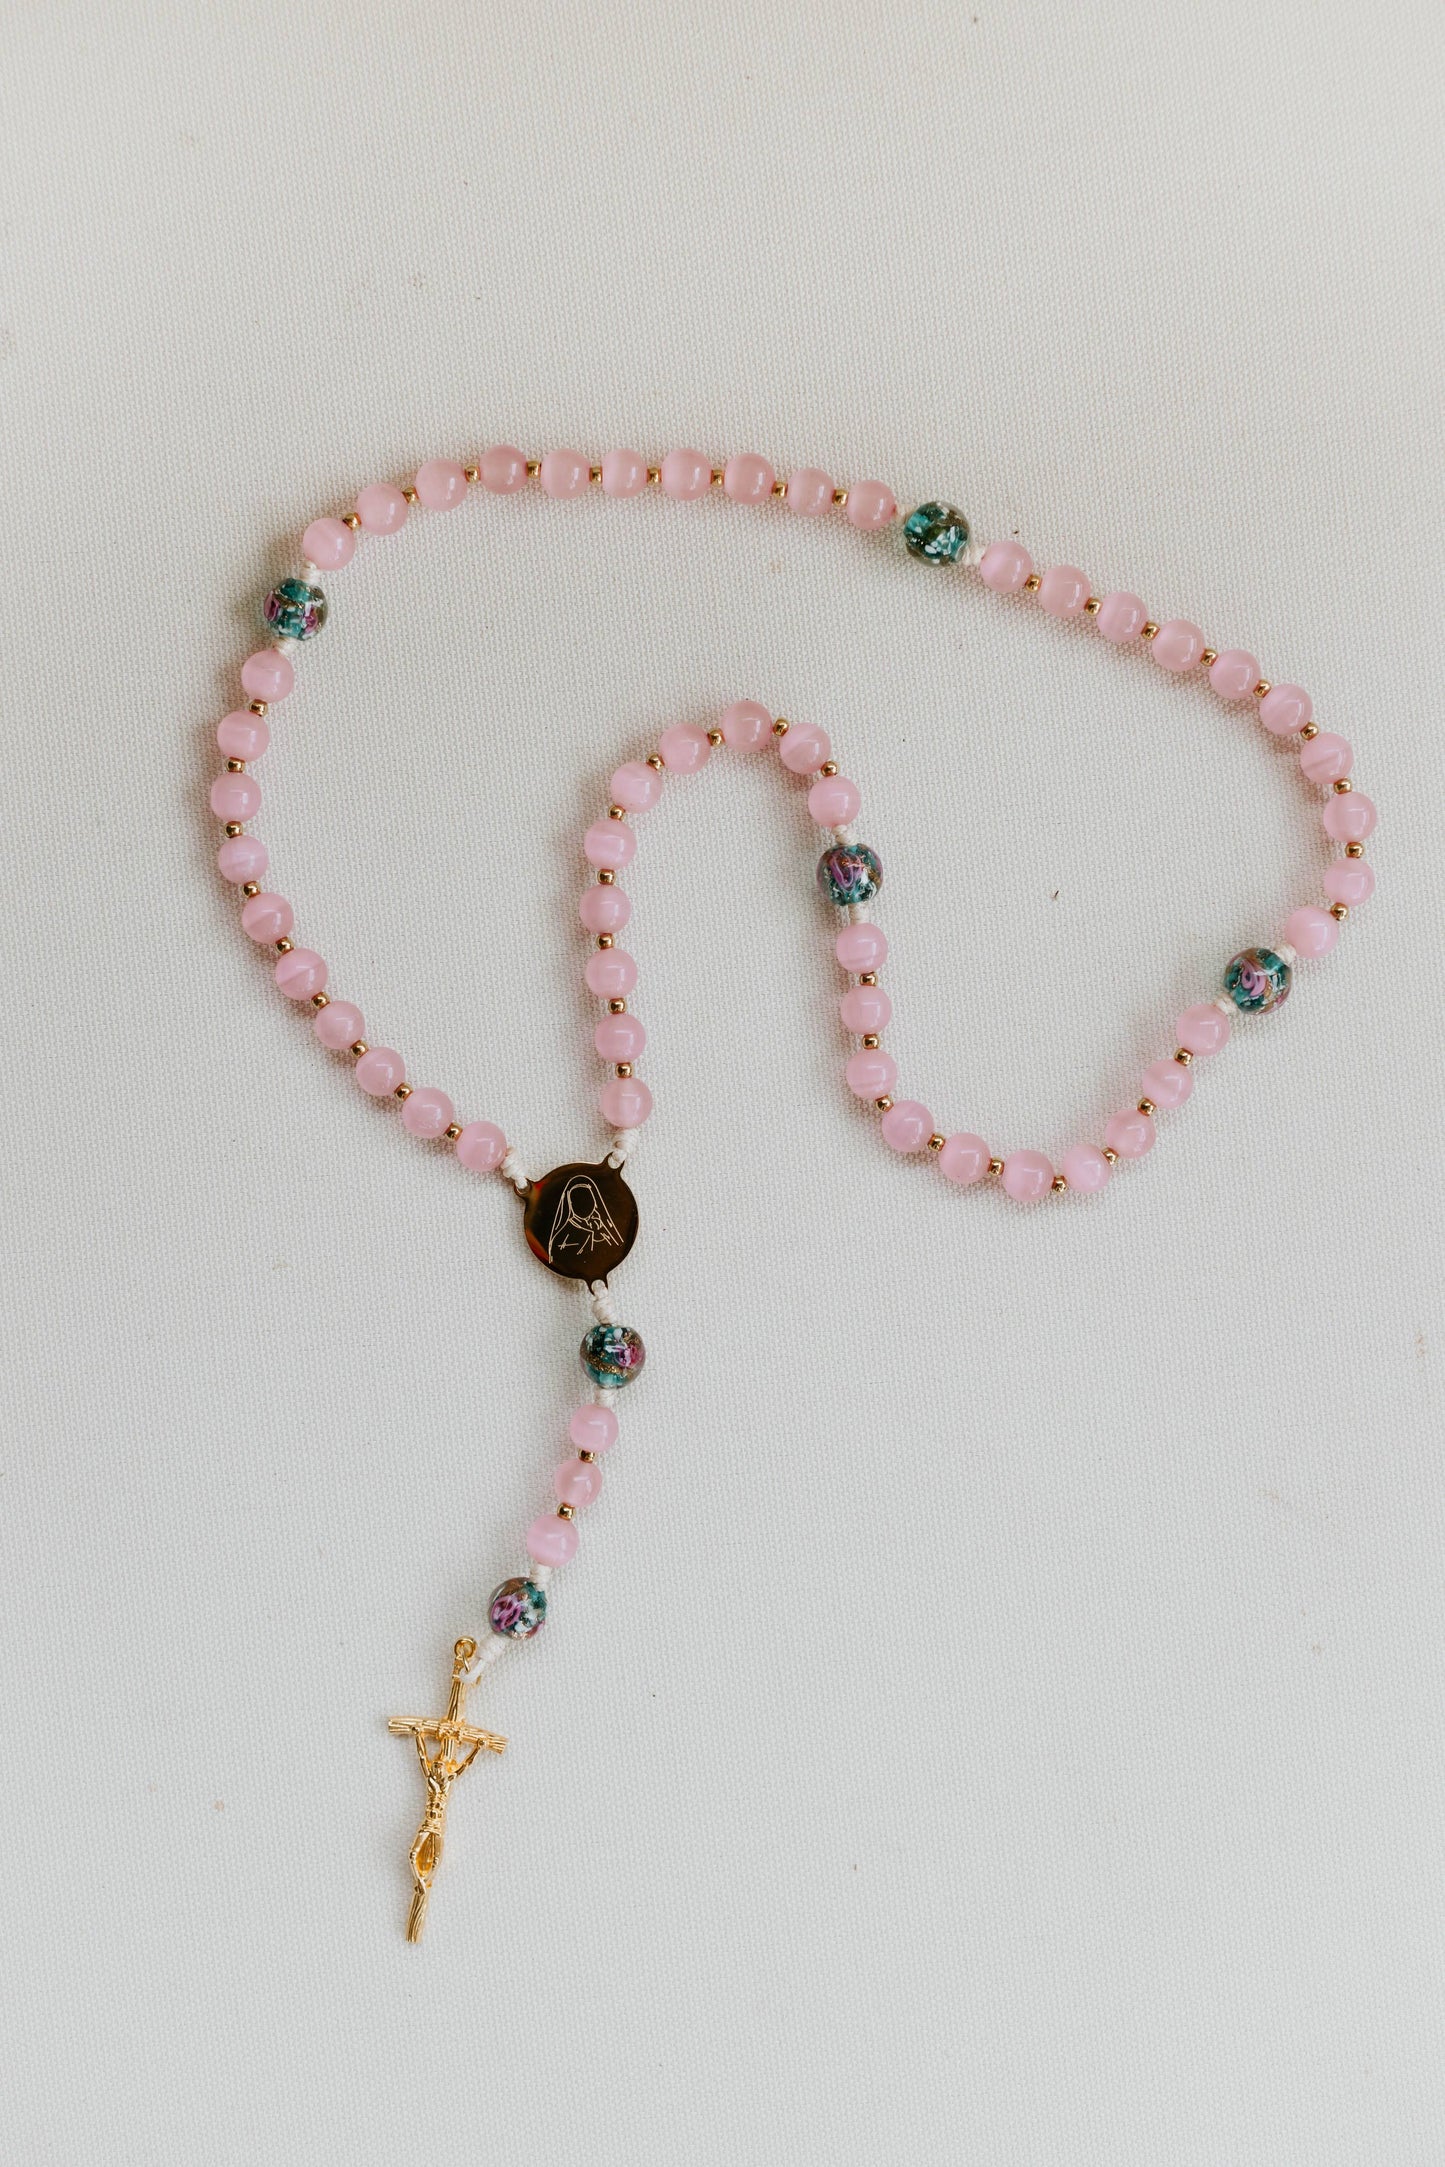 St. Therese of Lisieux Rosary